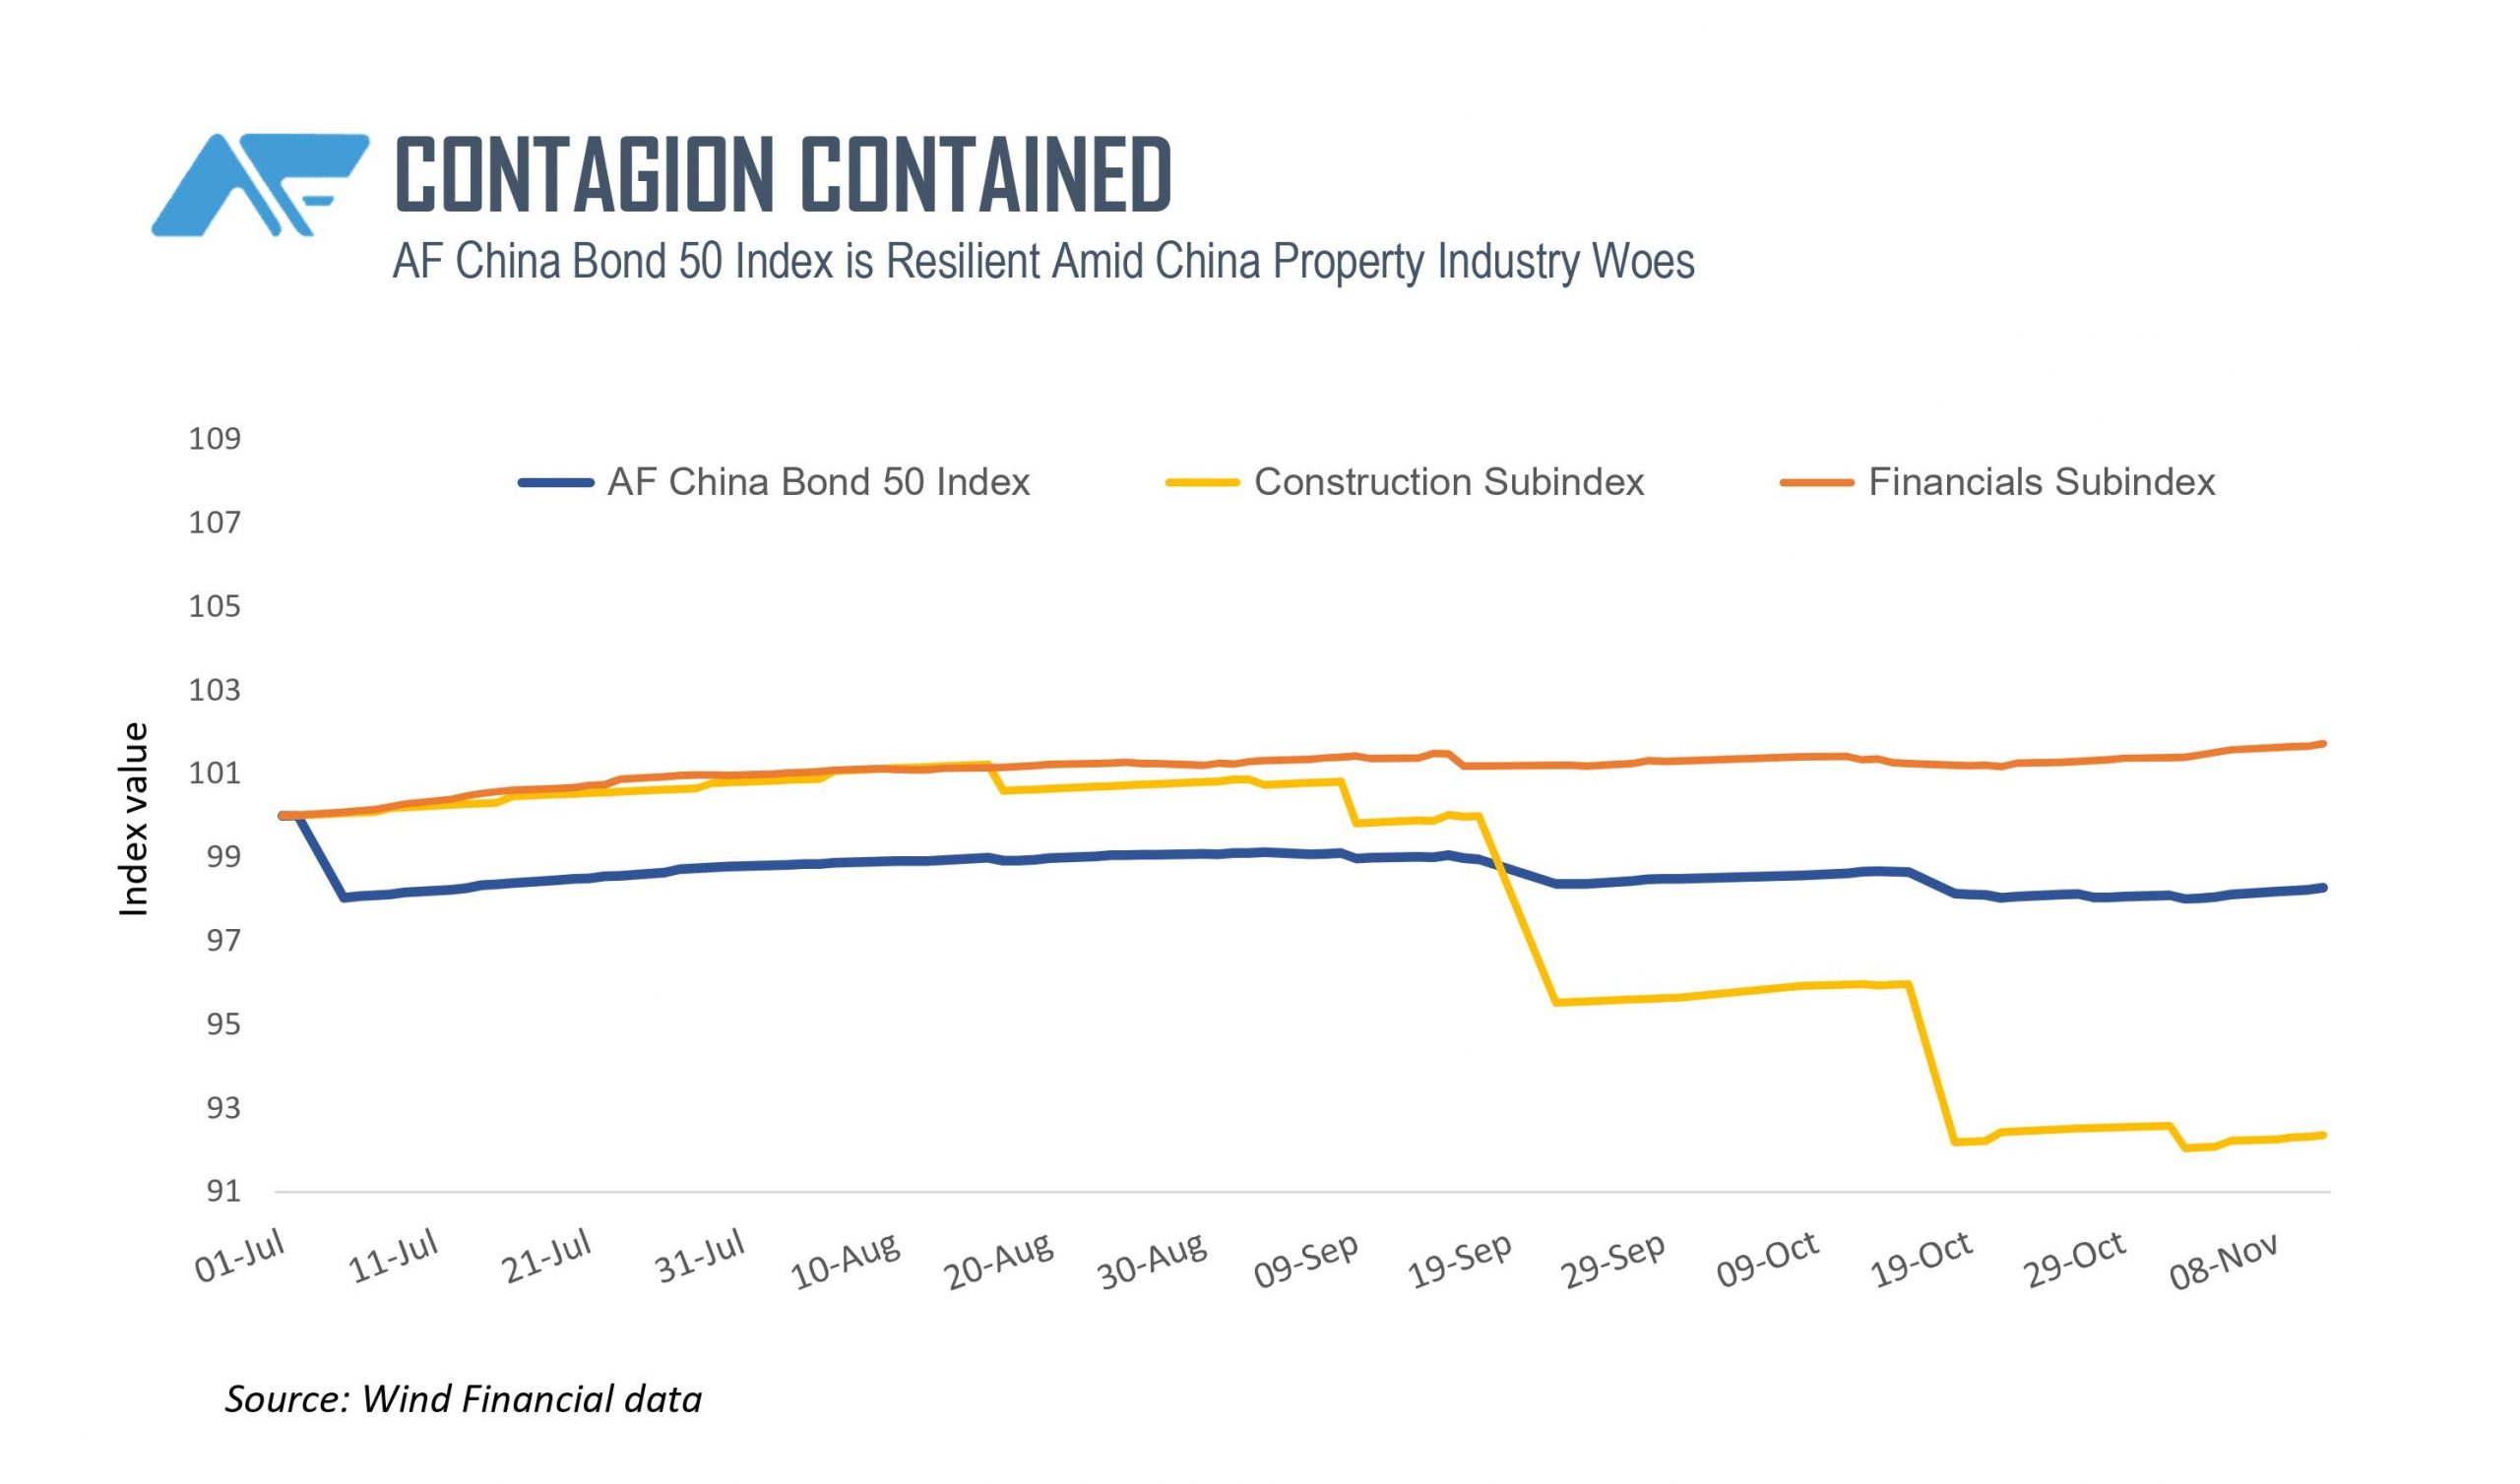 AF China Bond 50 Index is resilient amid China property industry woes.